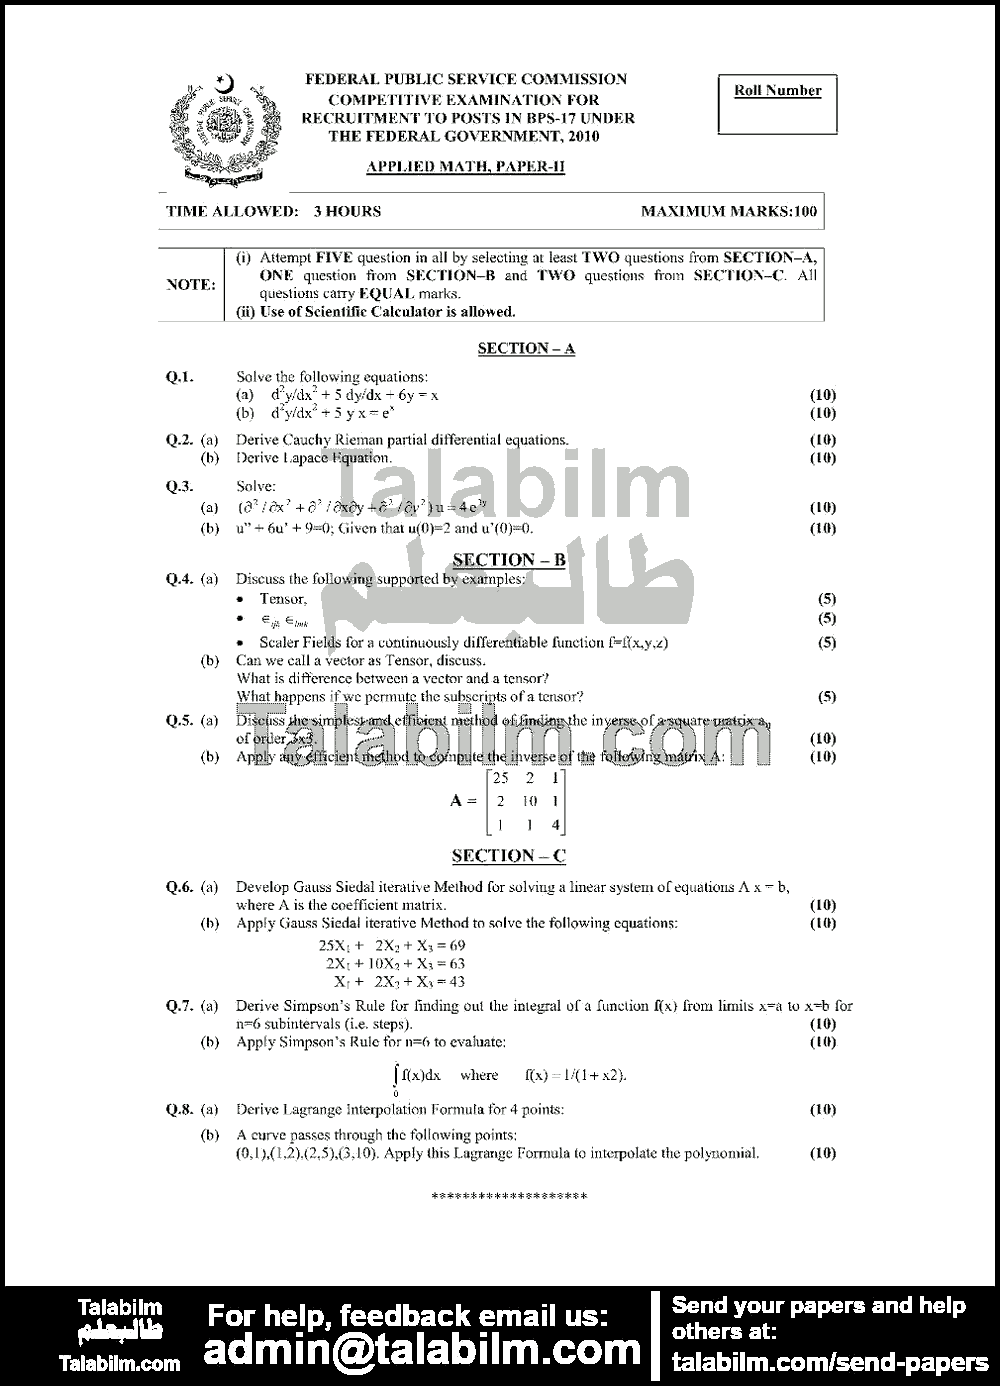 Applied Mathematics 0 past paper for 2010 Page No. 2